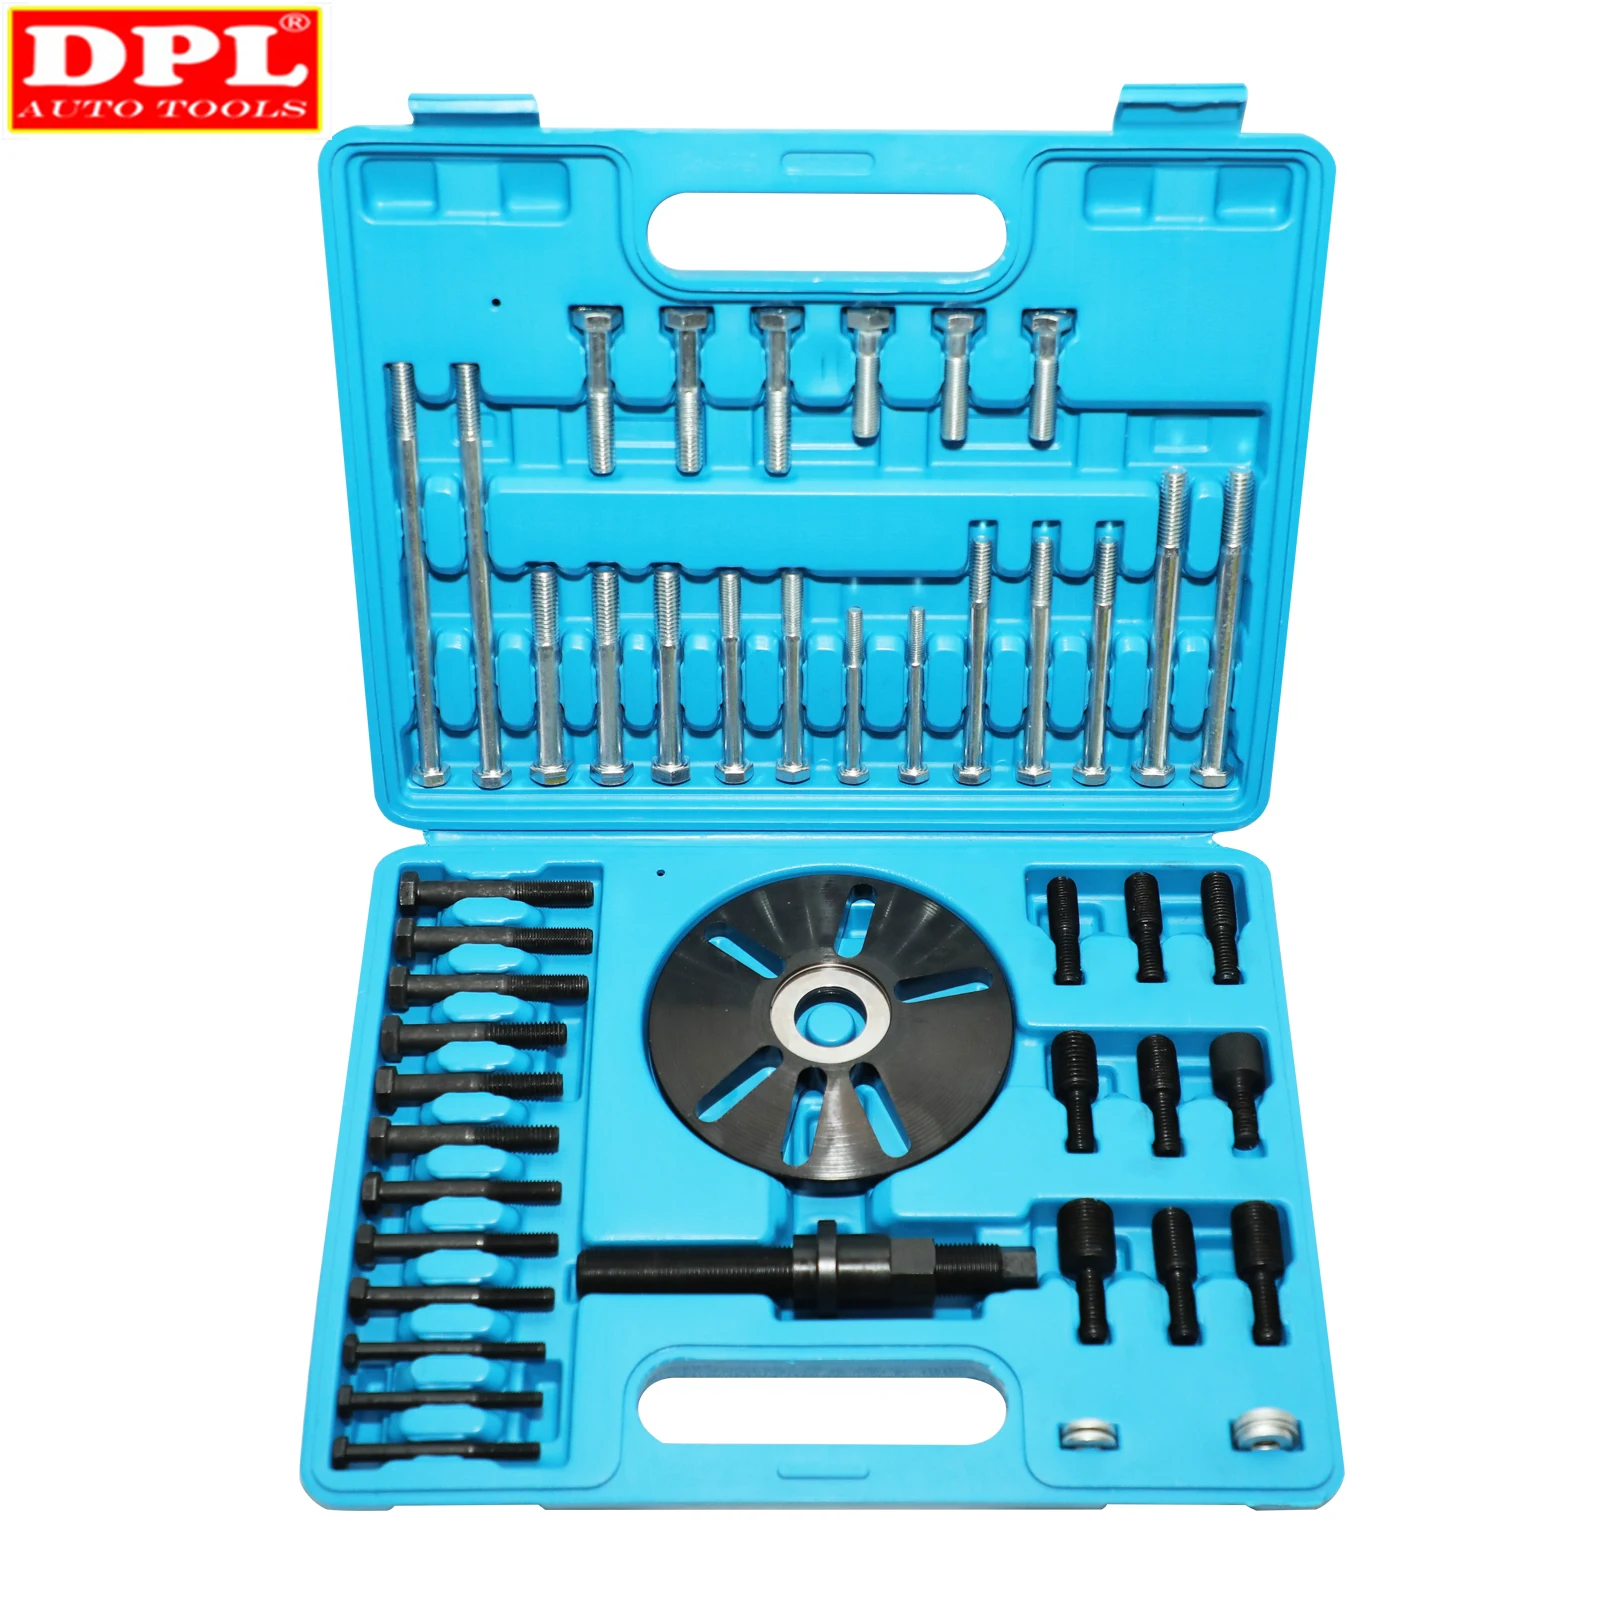 Harmonic Balancer Puller Set Remove Damper Pulley Puller 6PC Set,Automotive  Replacement Engine Auto Repair Tools - AliExpress